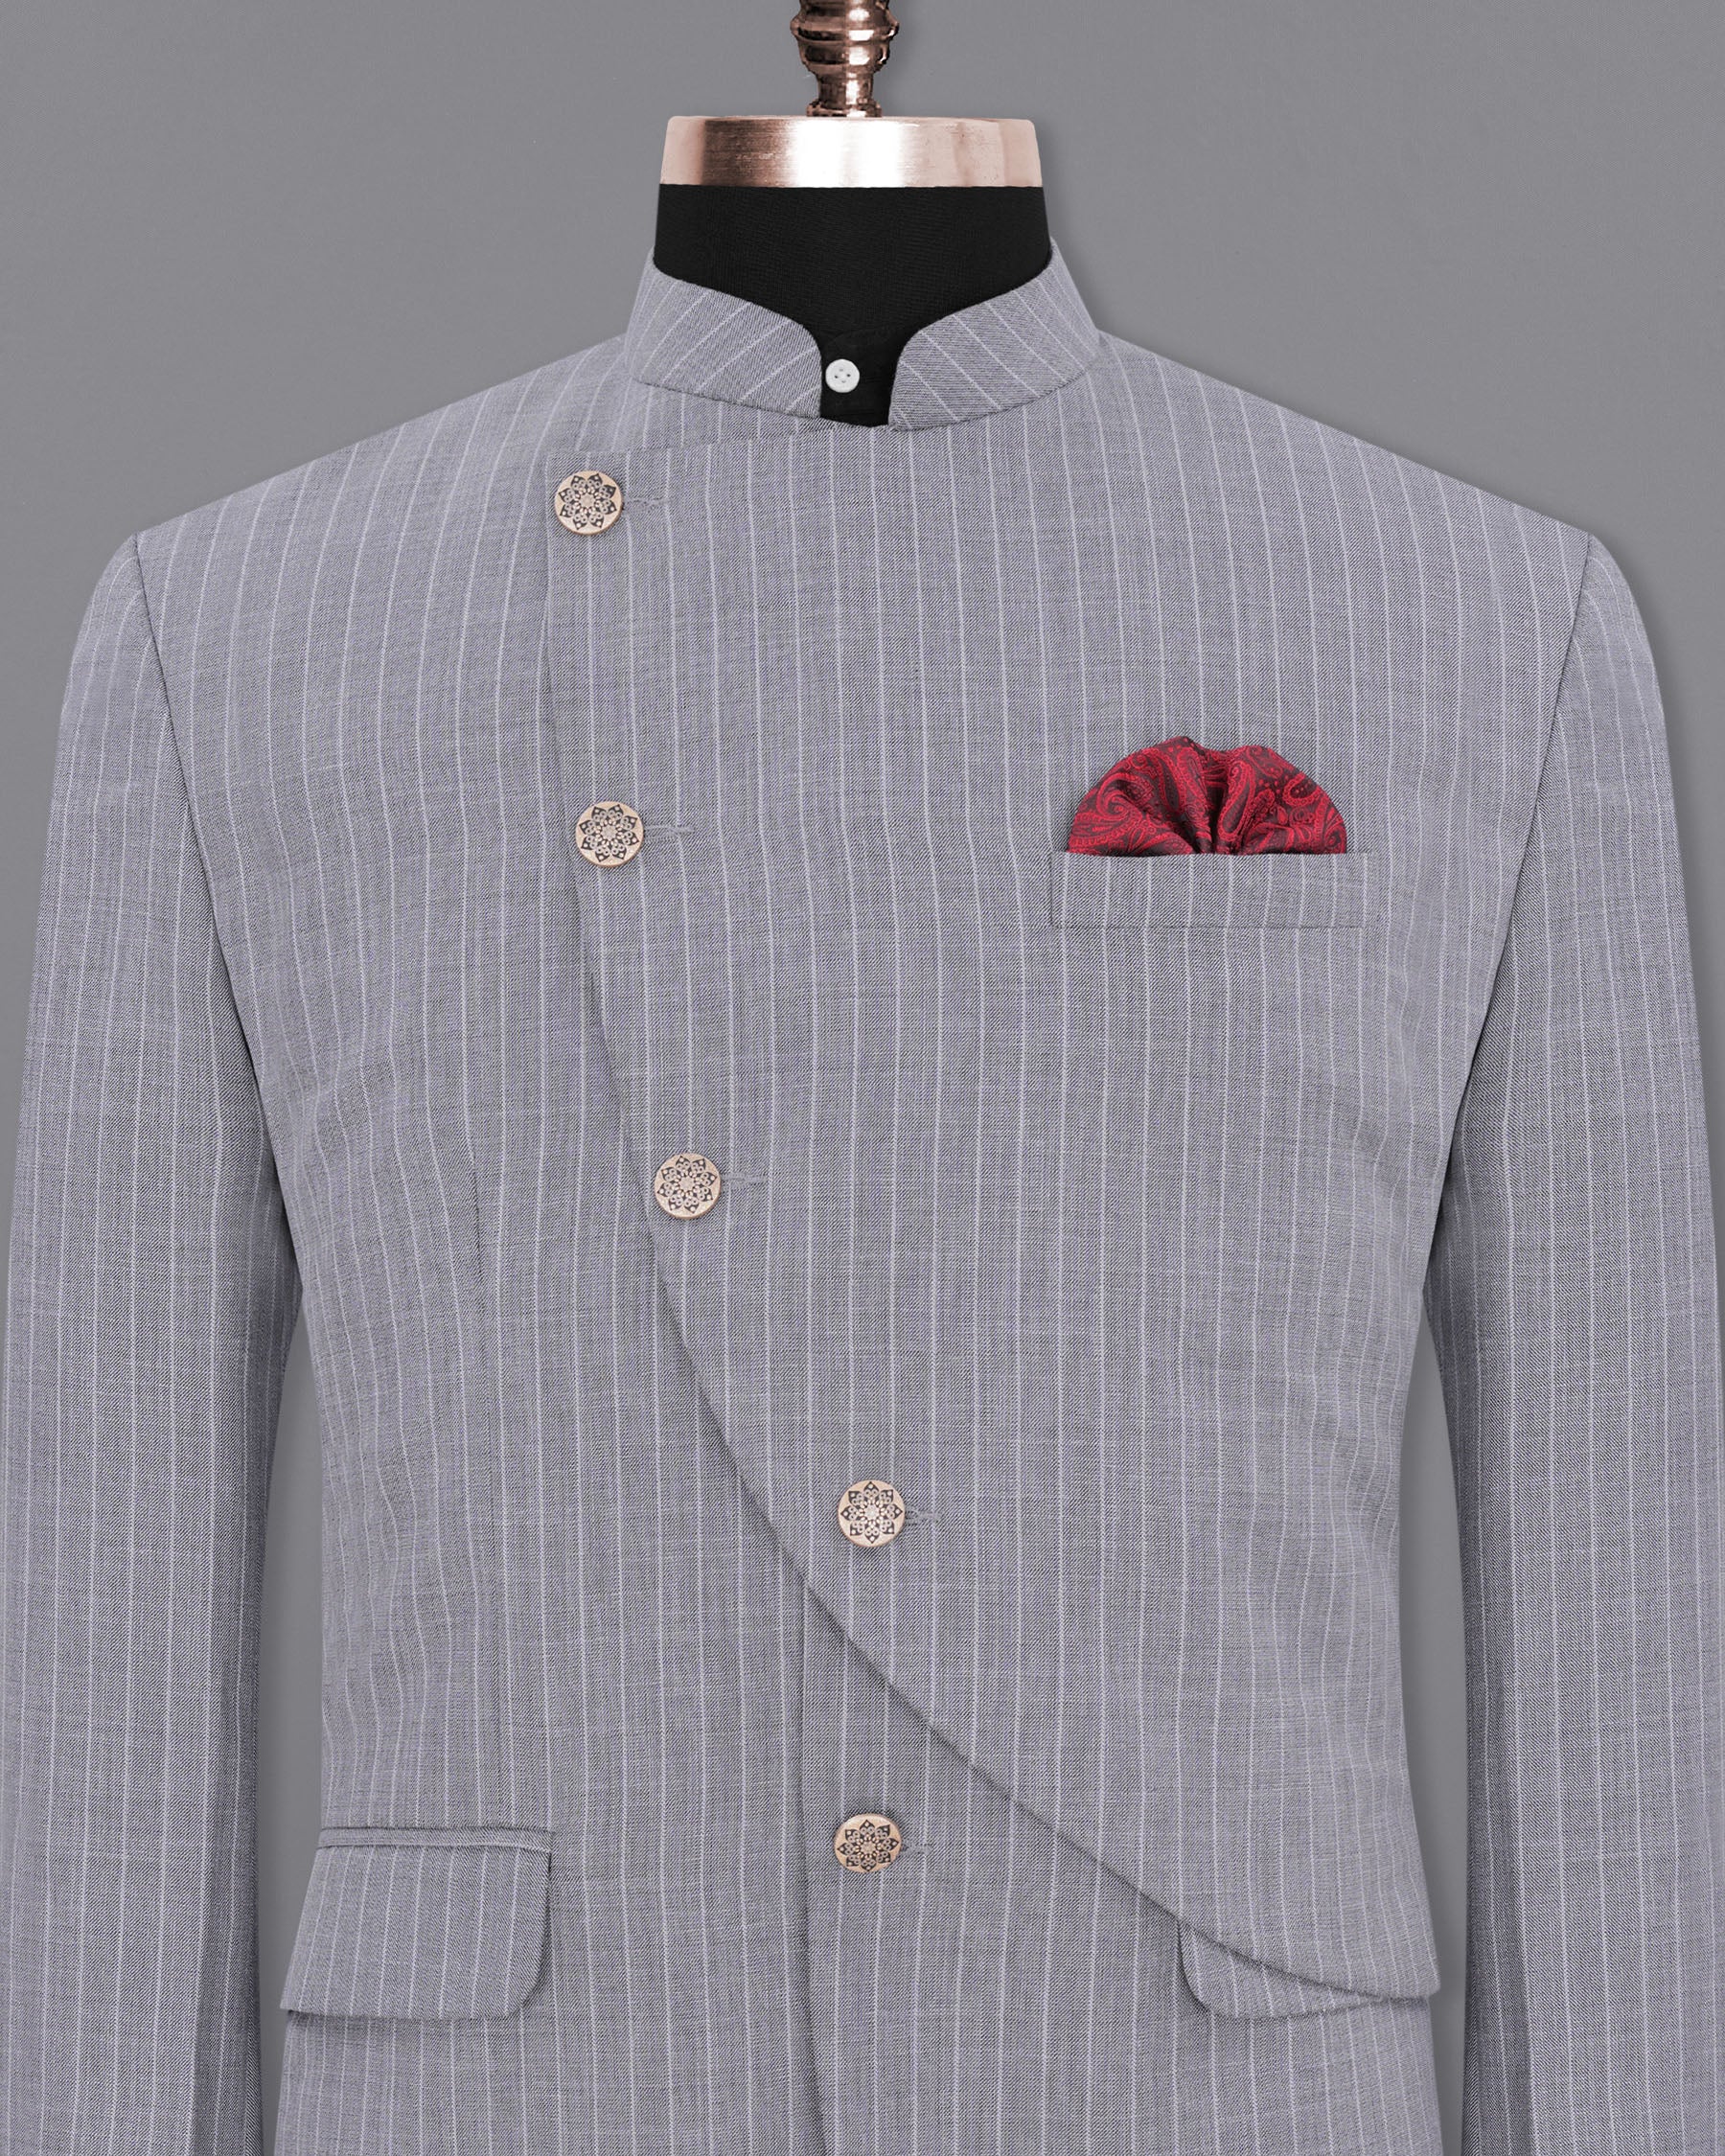 Mobster Grey Striped Cross Buttoned Bandhgala Designer Blazers BL1905-CBG-D44-36,BL1905-CBG-D44-38,BL1905-CBG-D44-40,BL1905-CBG-D44-42,BL1905-CBG-D44-44,BL1905-CBG-D44-46,BL1905-CBG-D44-48,BL1905-CBG-D44-50,BL1905-CBG-D44-52,BL1905-CBG-D44-54,BL1905-CBG-D44-56,BL1905-CBG-D44-58,BL1905-CBG-D44-60